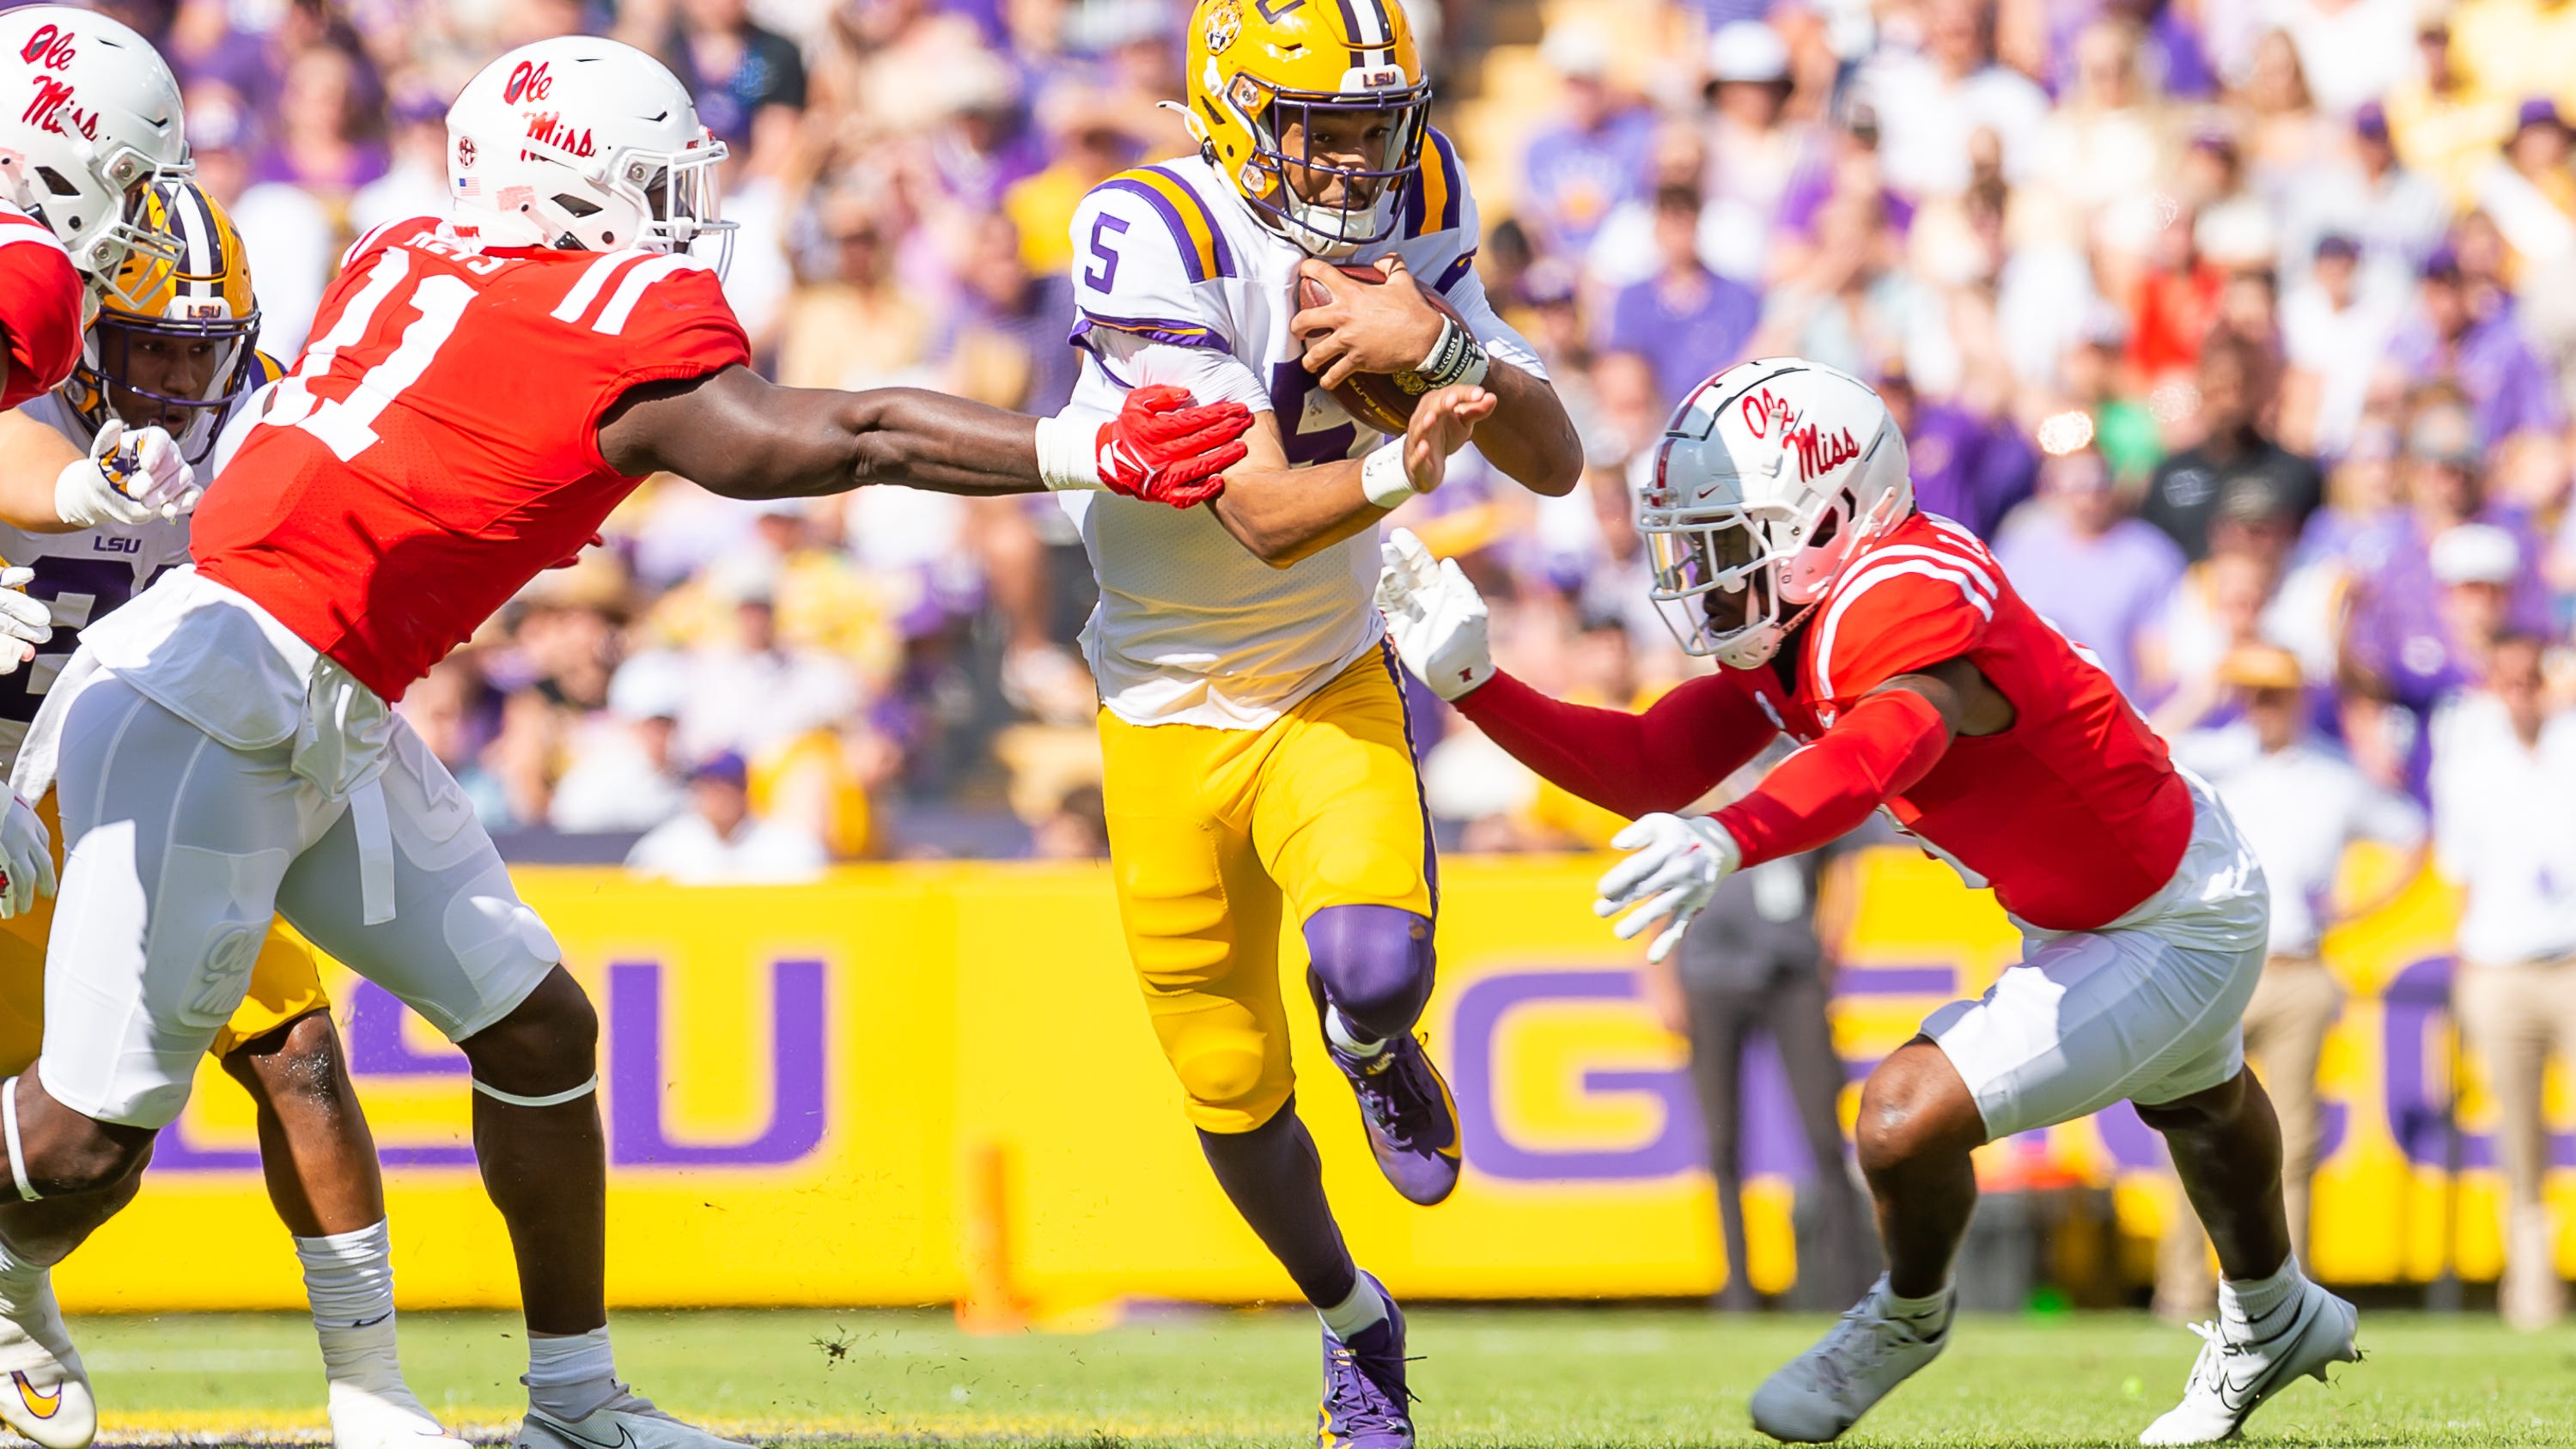 LSU football dominates Ole Miss in lopsided win for Brian Kelly